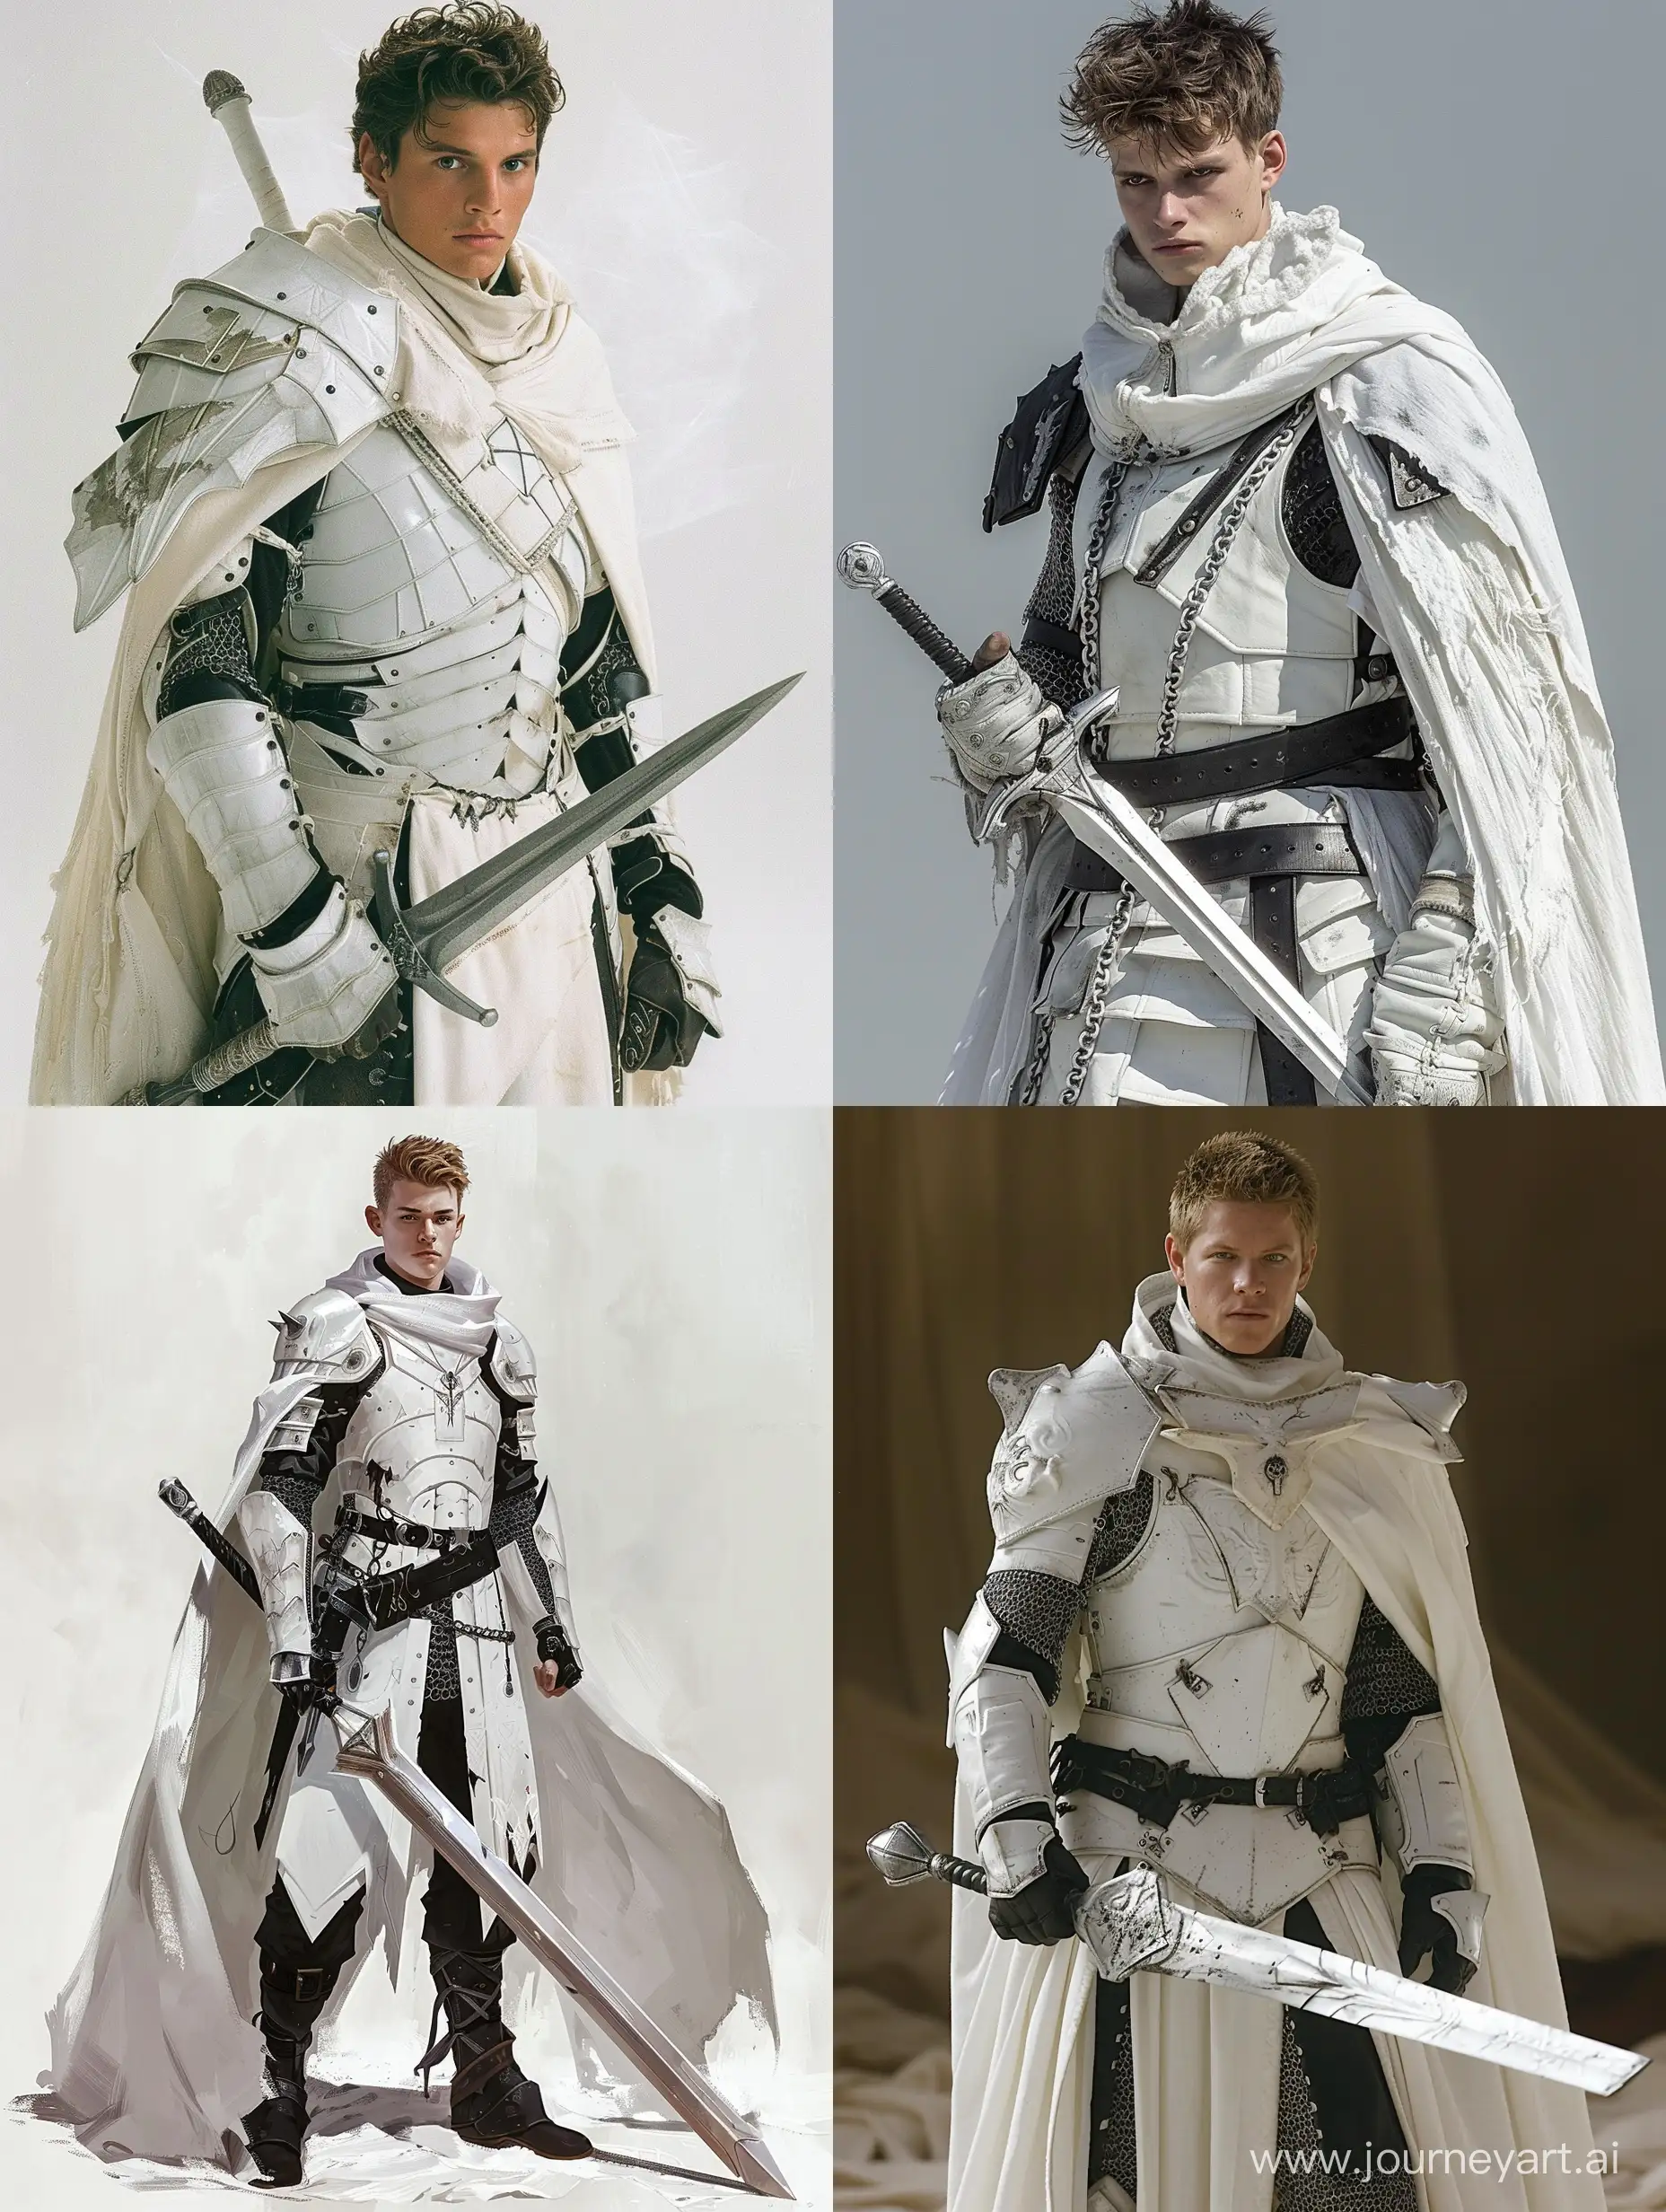 Young-Warrior-of-Light-Wielding-Silver-Sword-in-White-Chainmail